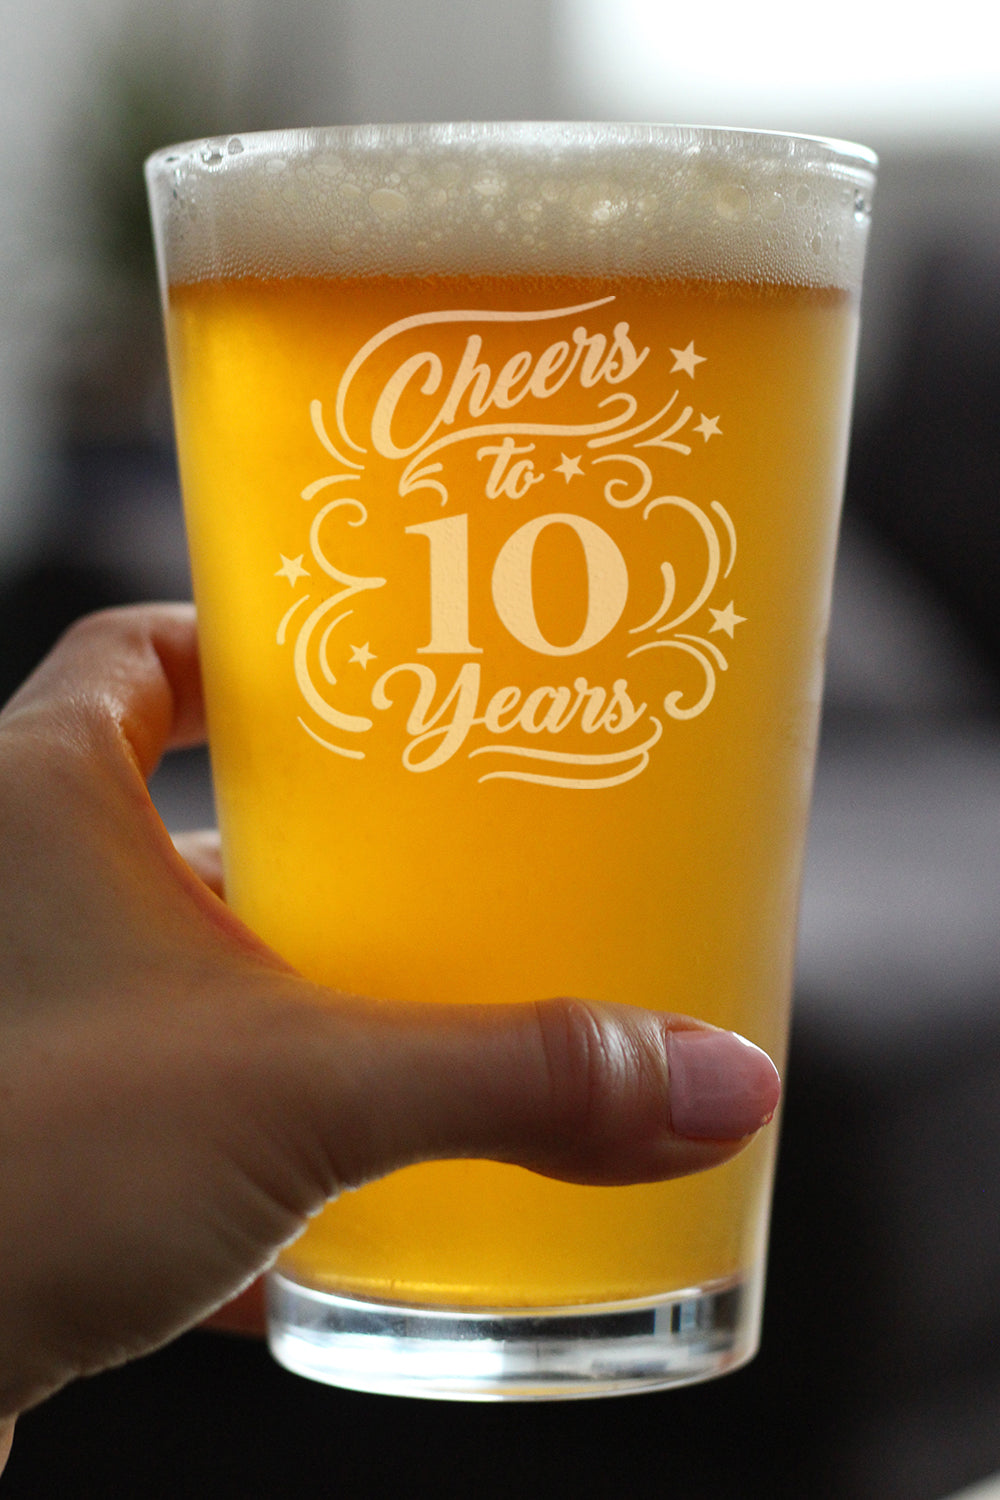 Cheers to 10 Years - Pint Glass for Beer - Gifts for Women &amp; Men - 10th Anniversary Party Decor - 16 Oz Glass